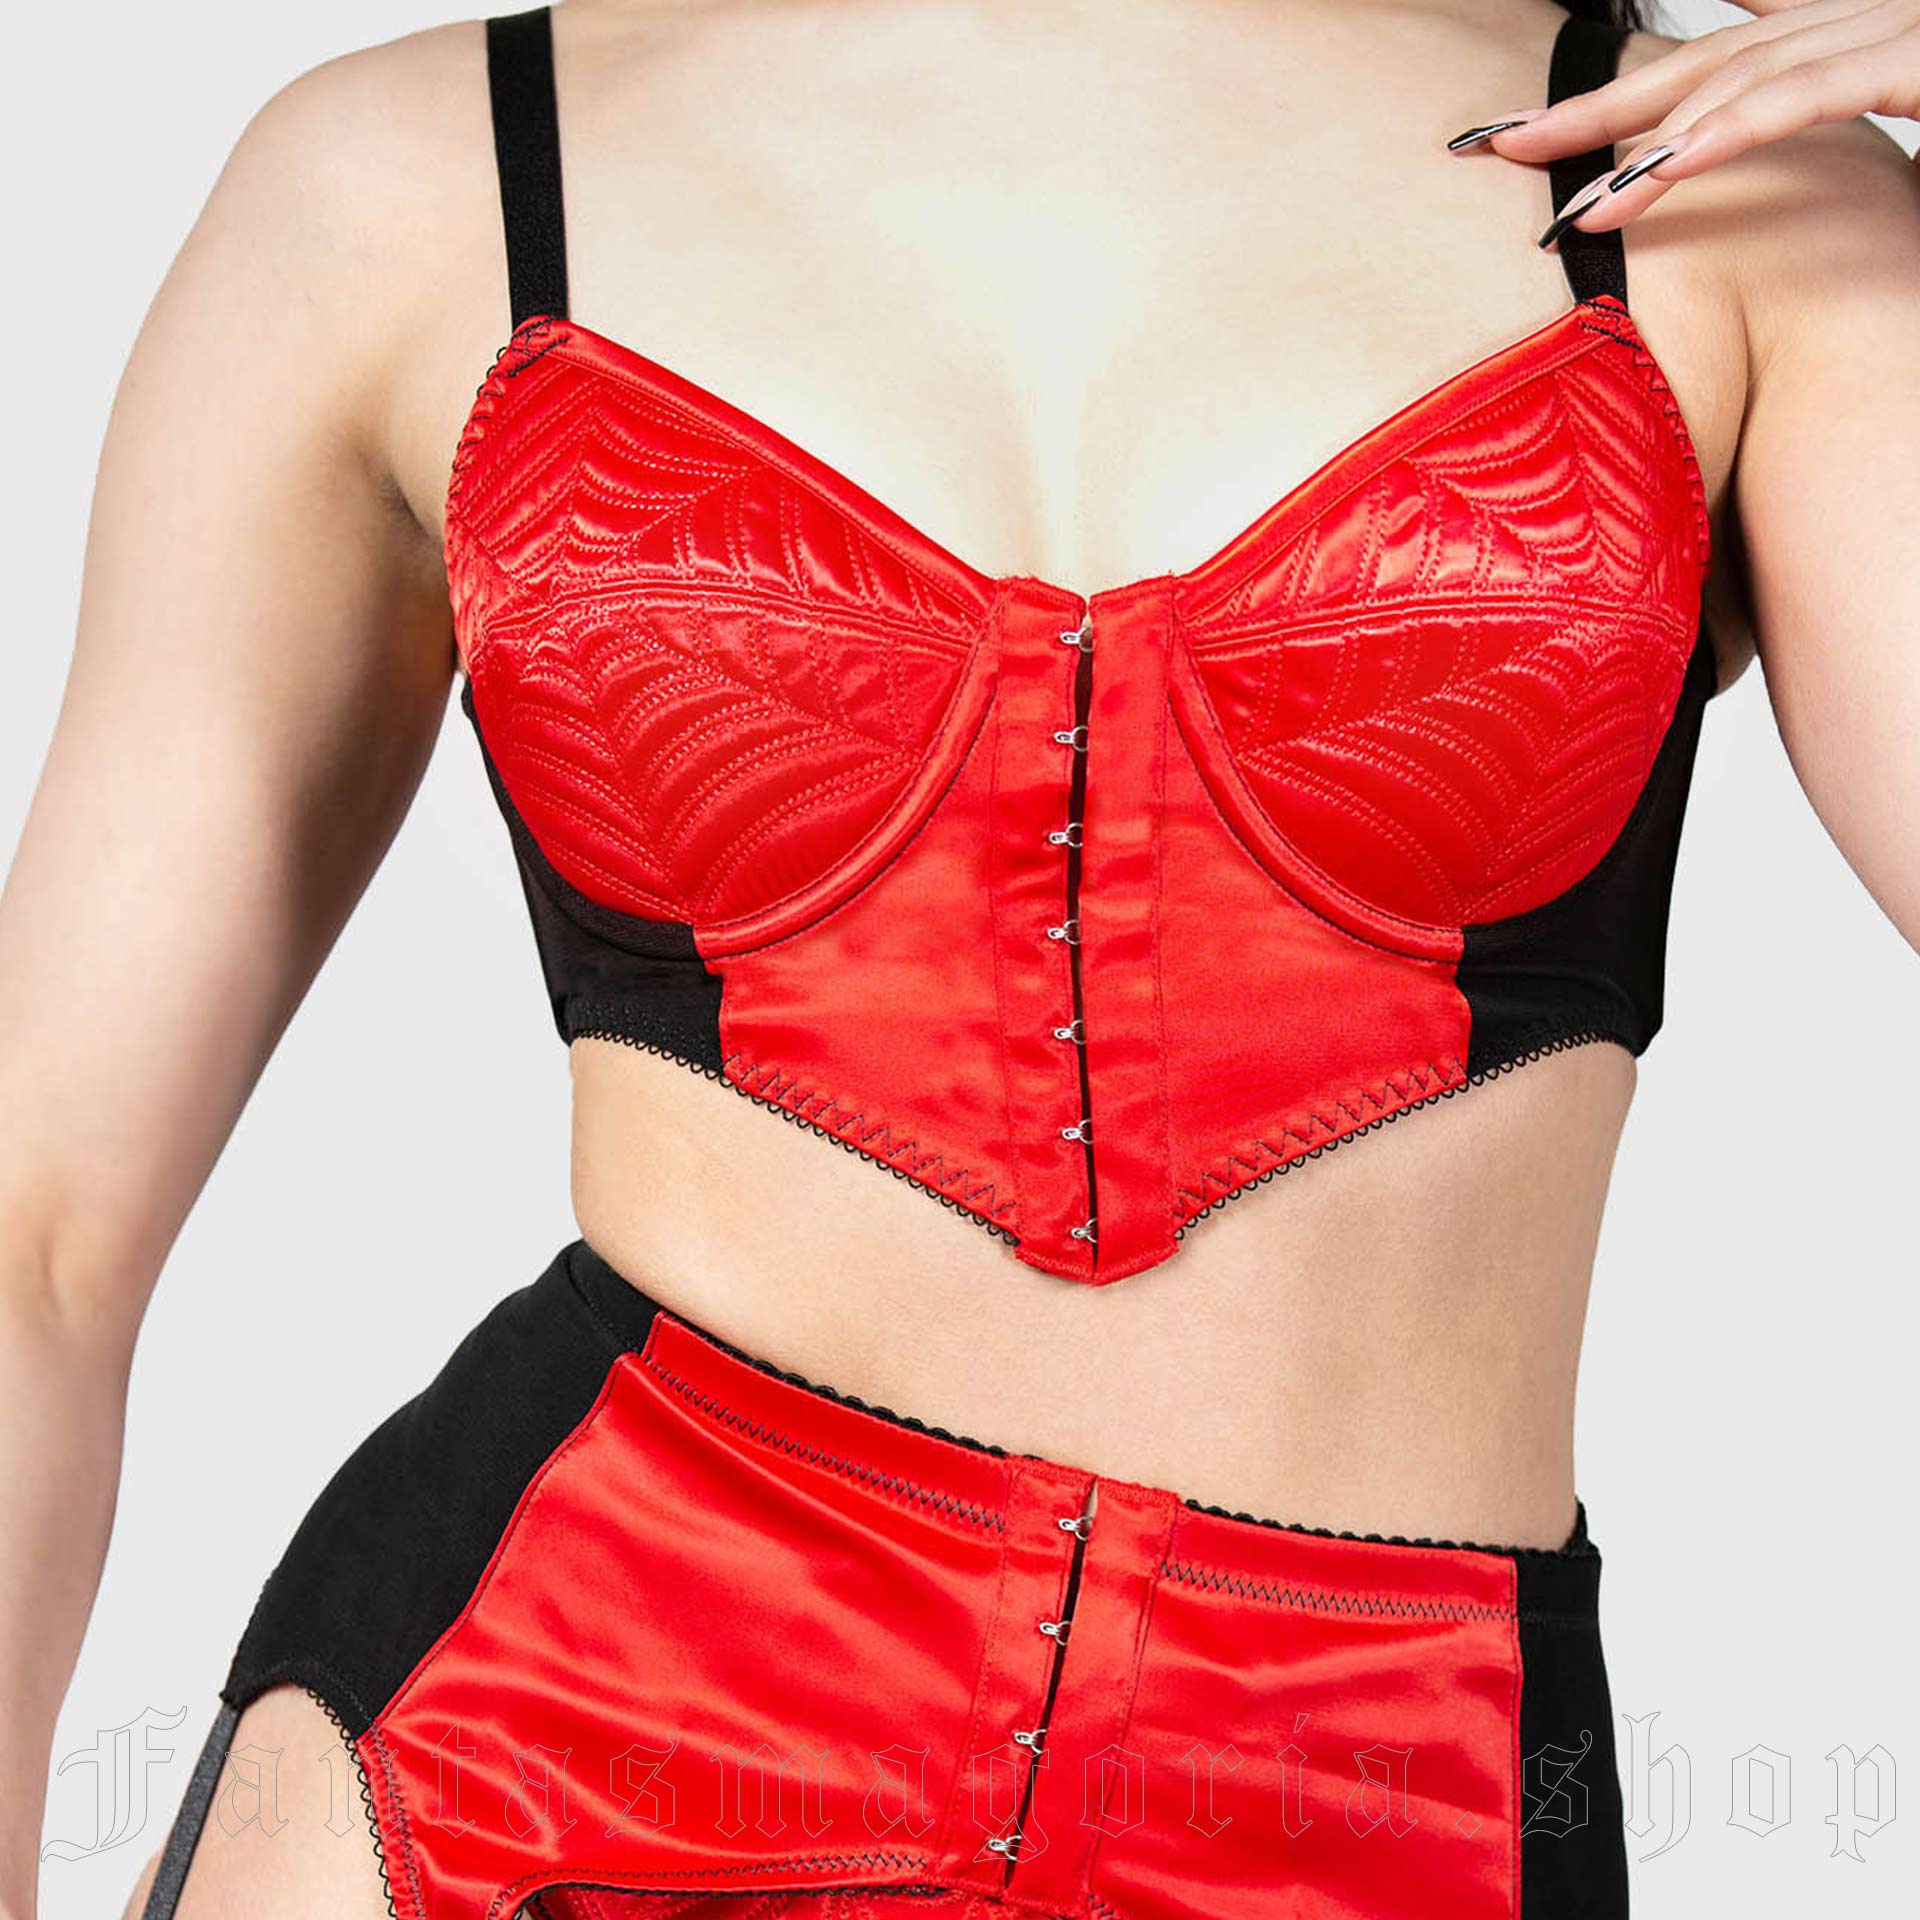 Wholesale red thong bodysuit For An Irresistible Look 